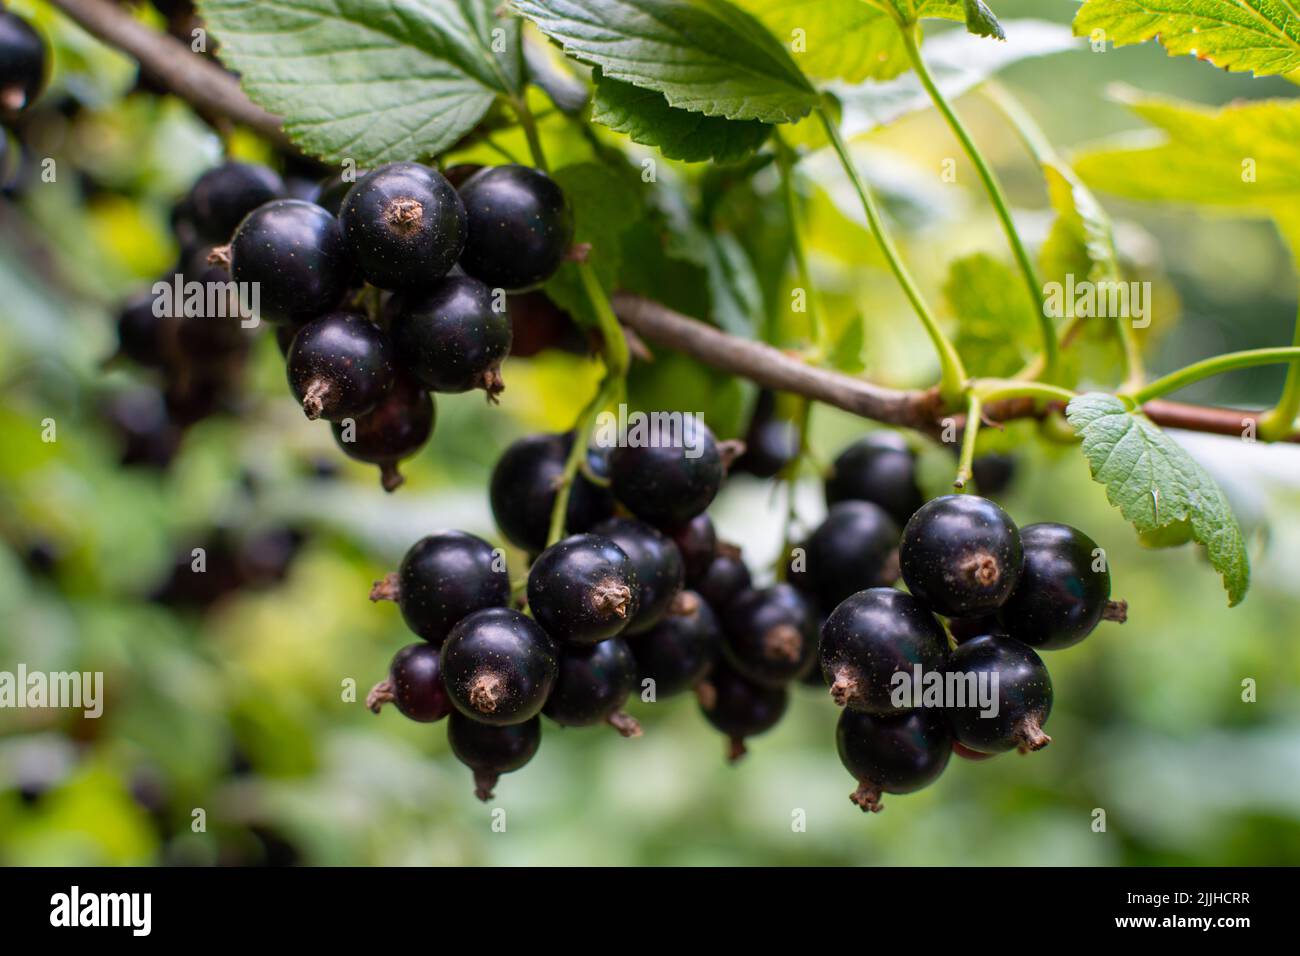 Branch of black currant with many ripe berries Stock Photo